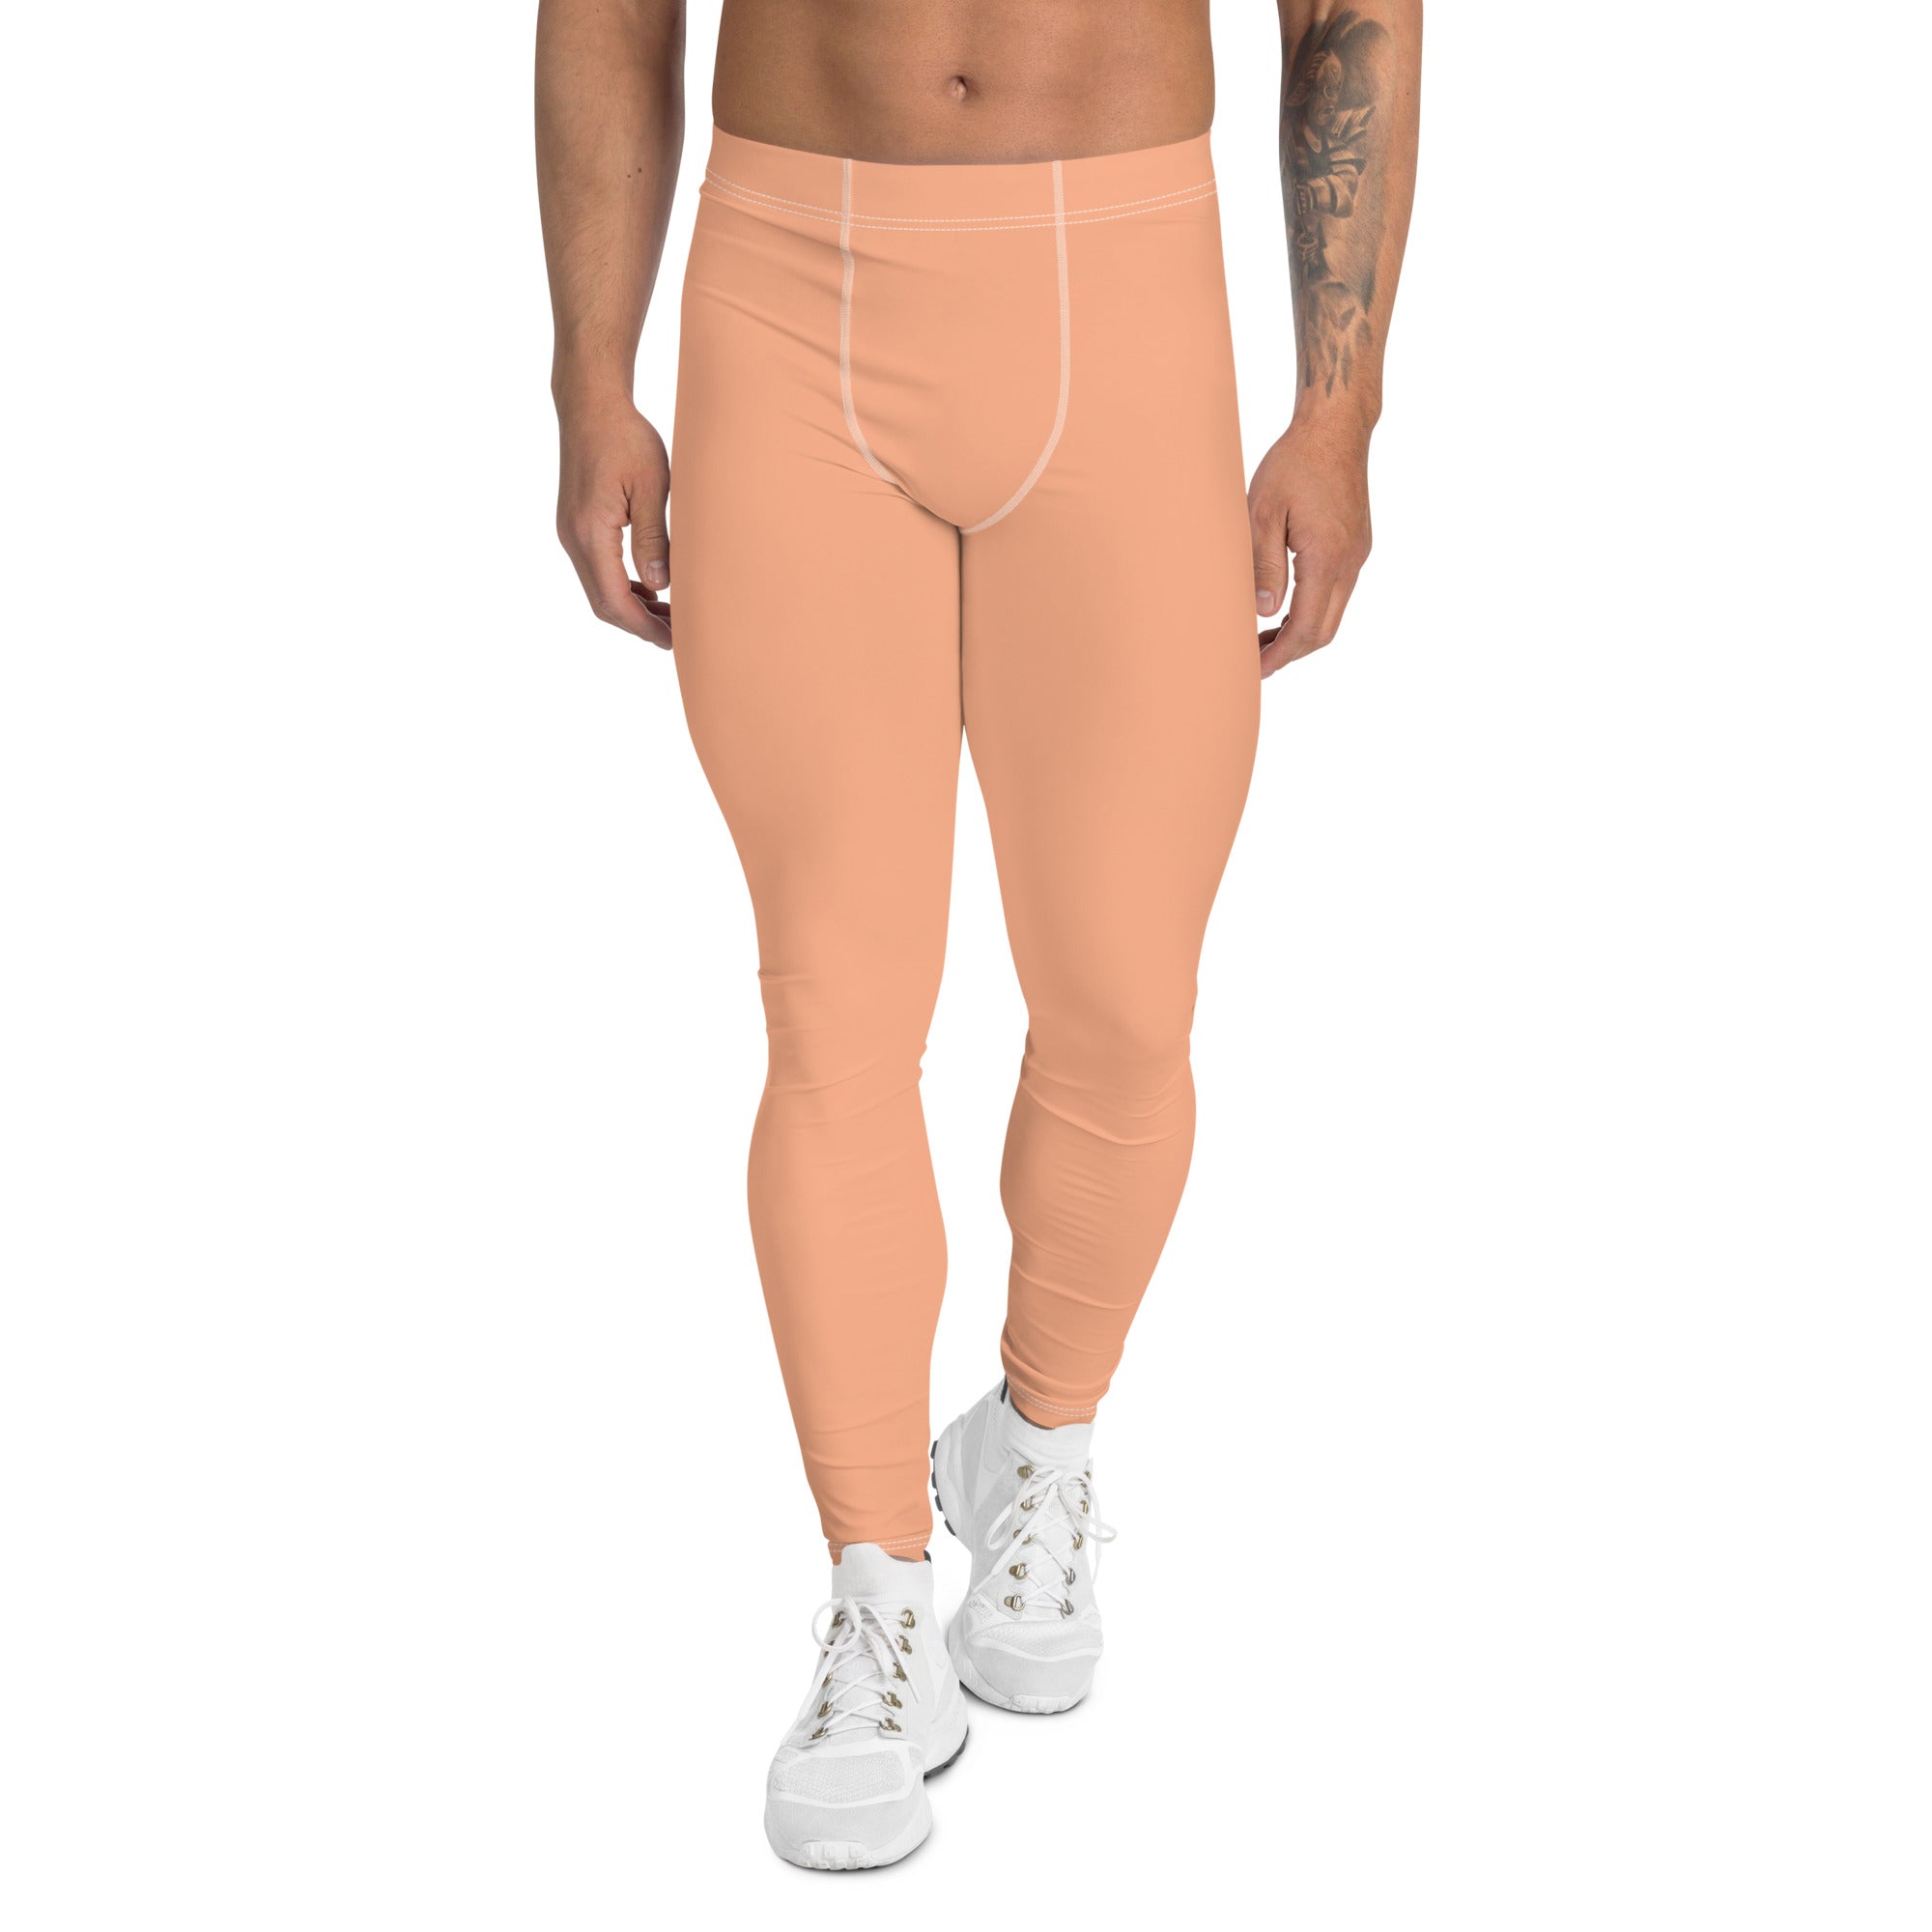 Baby Pink Nude Meggings, Solid Pink Color Print Premium Classic Elastic Comfy Men's Leggings Fitted Tights Pants - Made in USA/MX/EU (US Size: XS-3XL) Spandex Meggings Men's Workout Gym Tights Leggings, Compression Tights, Kinky Fetish Men Pants